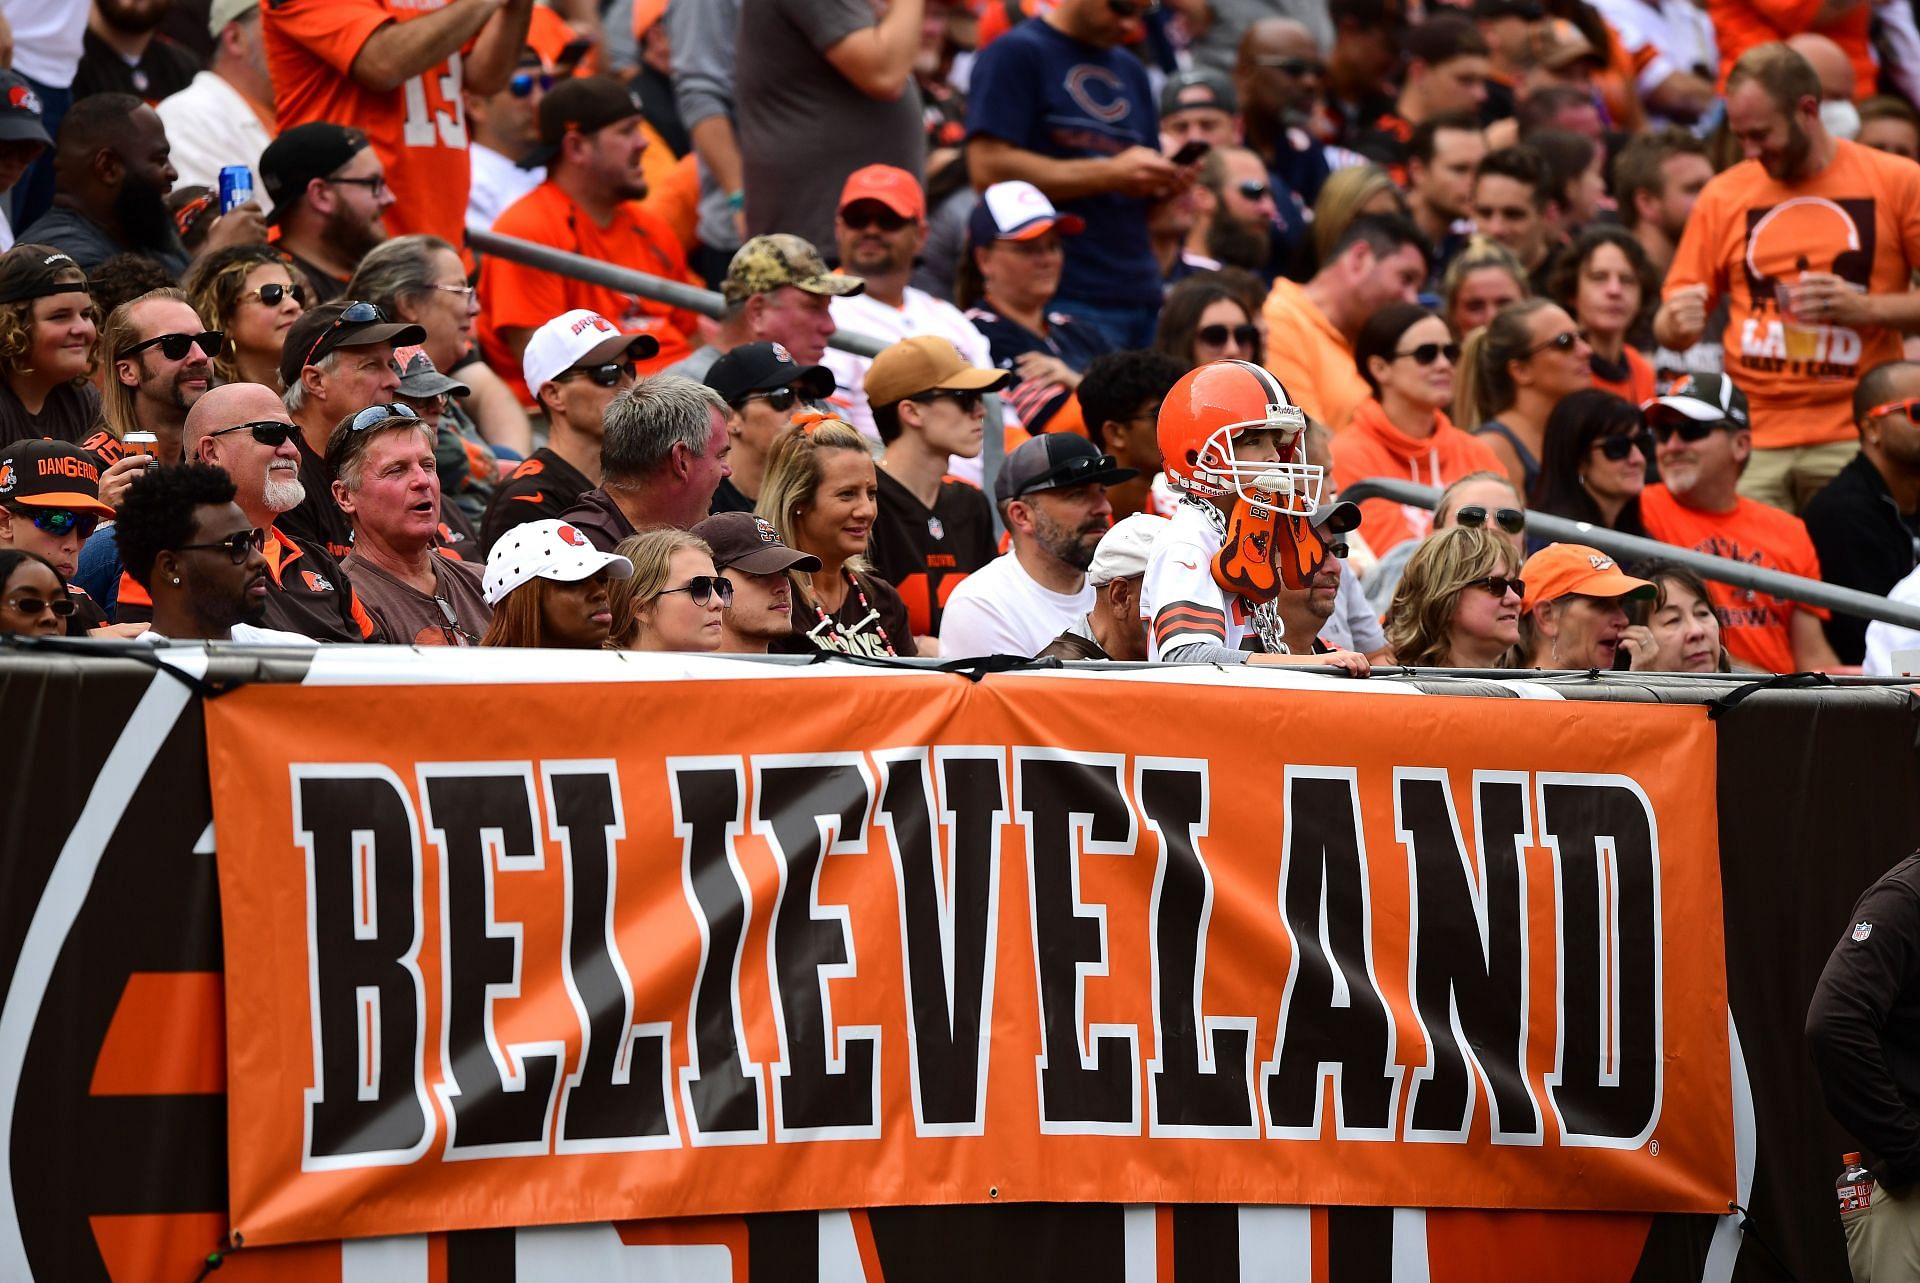 Cleveland Browns fans with Believeland sign